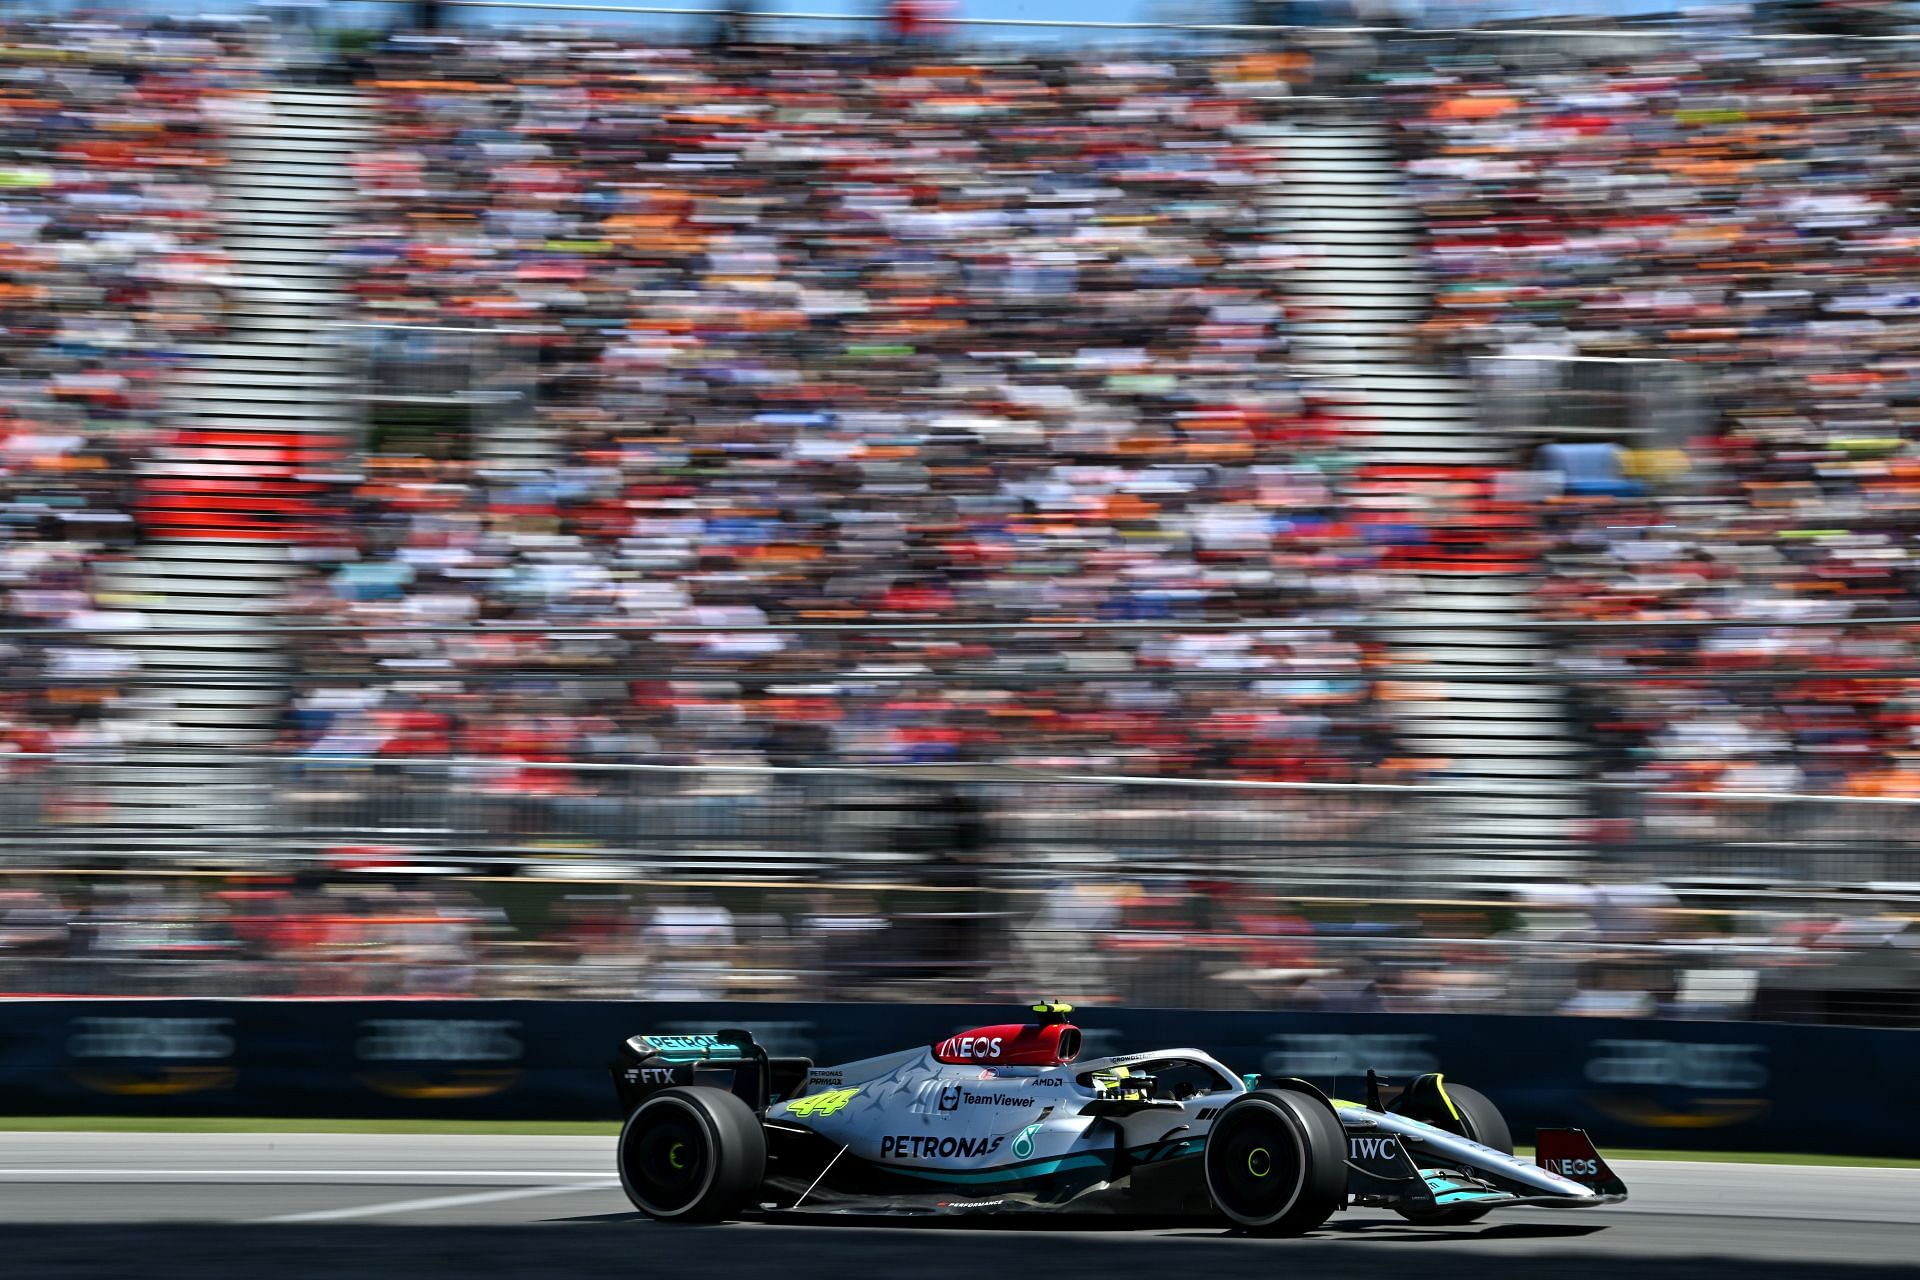 Mercedes driver in action during the 2022 F1 Canadian GP. (Photo by Minas Panagiotakis/Getty Images)